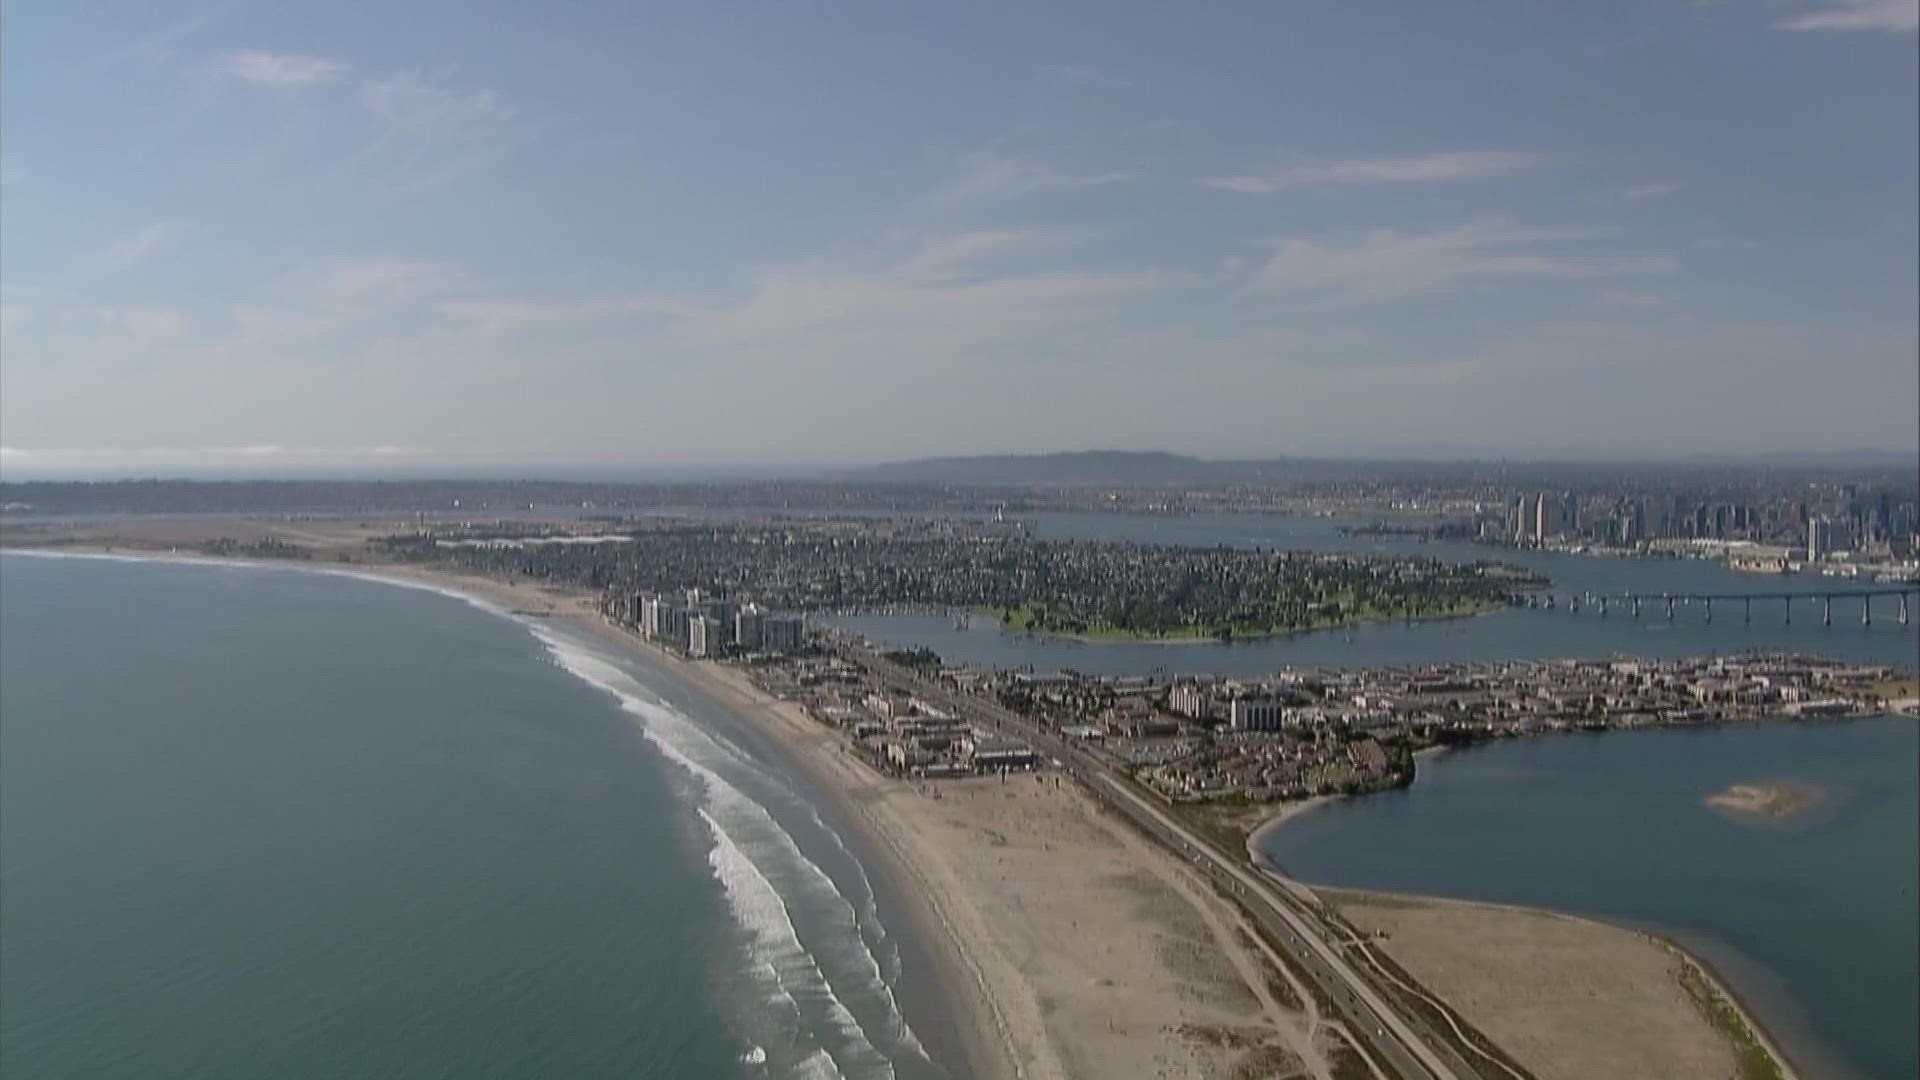 Chopper 8 flies above beautiful Silver Strand on August 1, 2022.